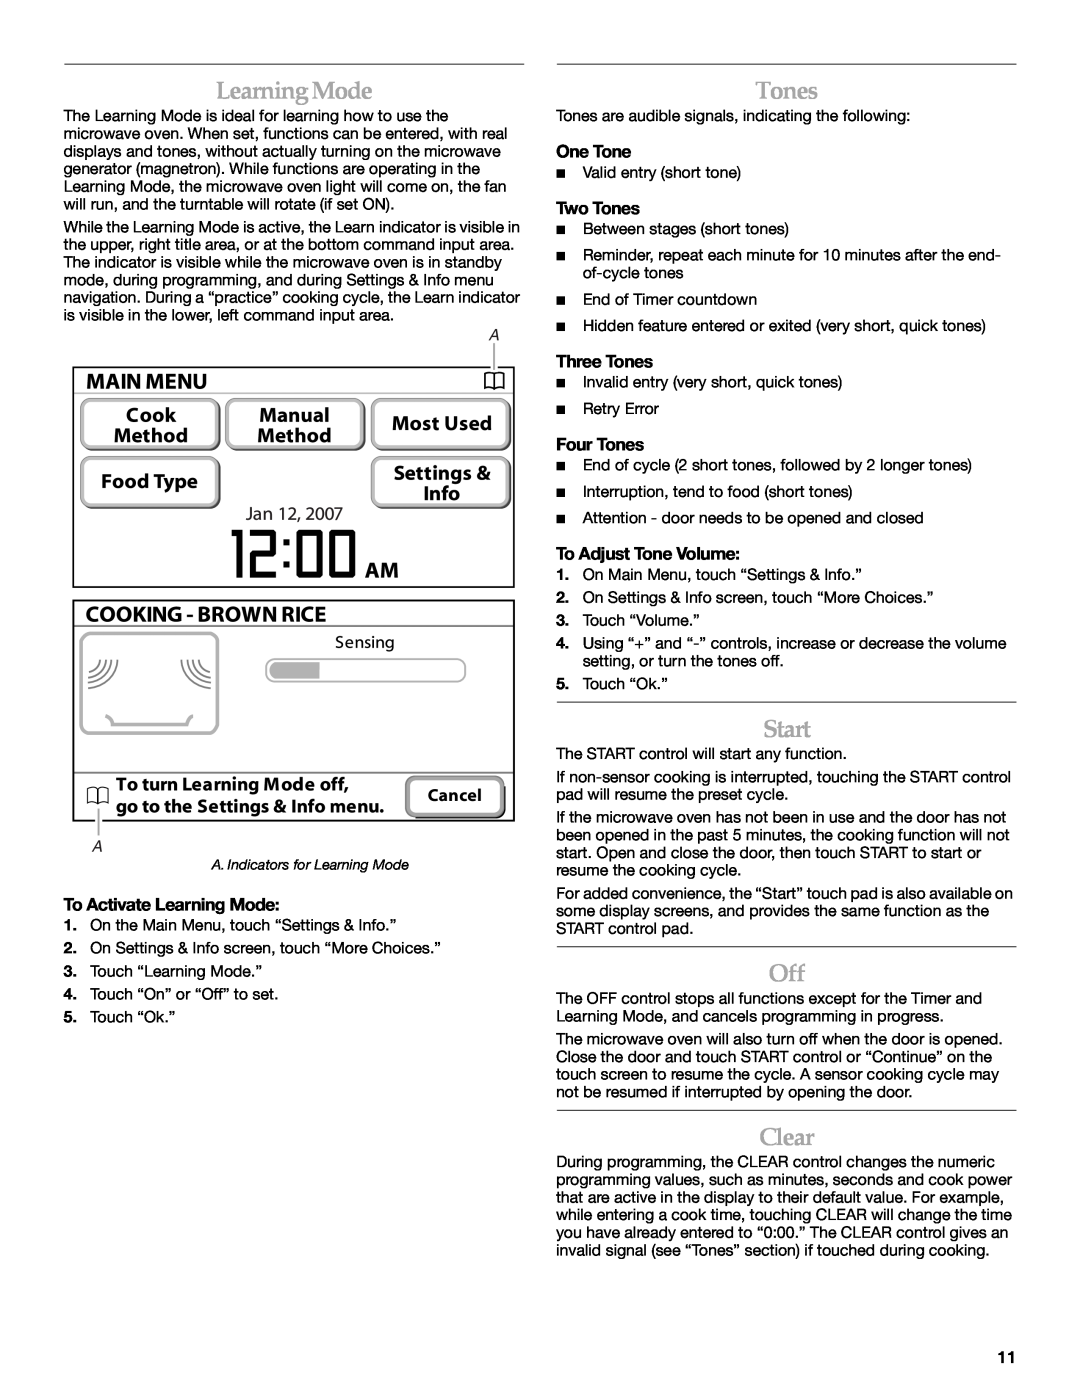 KitchenAid KHMS2056SBL manual LearningMode, Start, Clear, To Activate Learning Mode, One Tone, Two Tones, Three Tones 